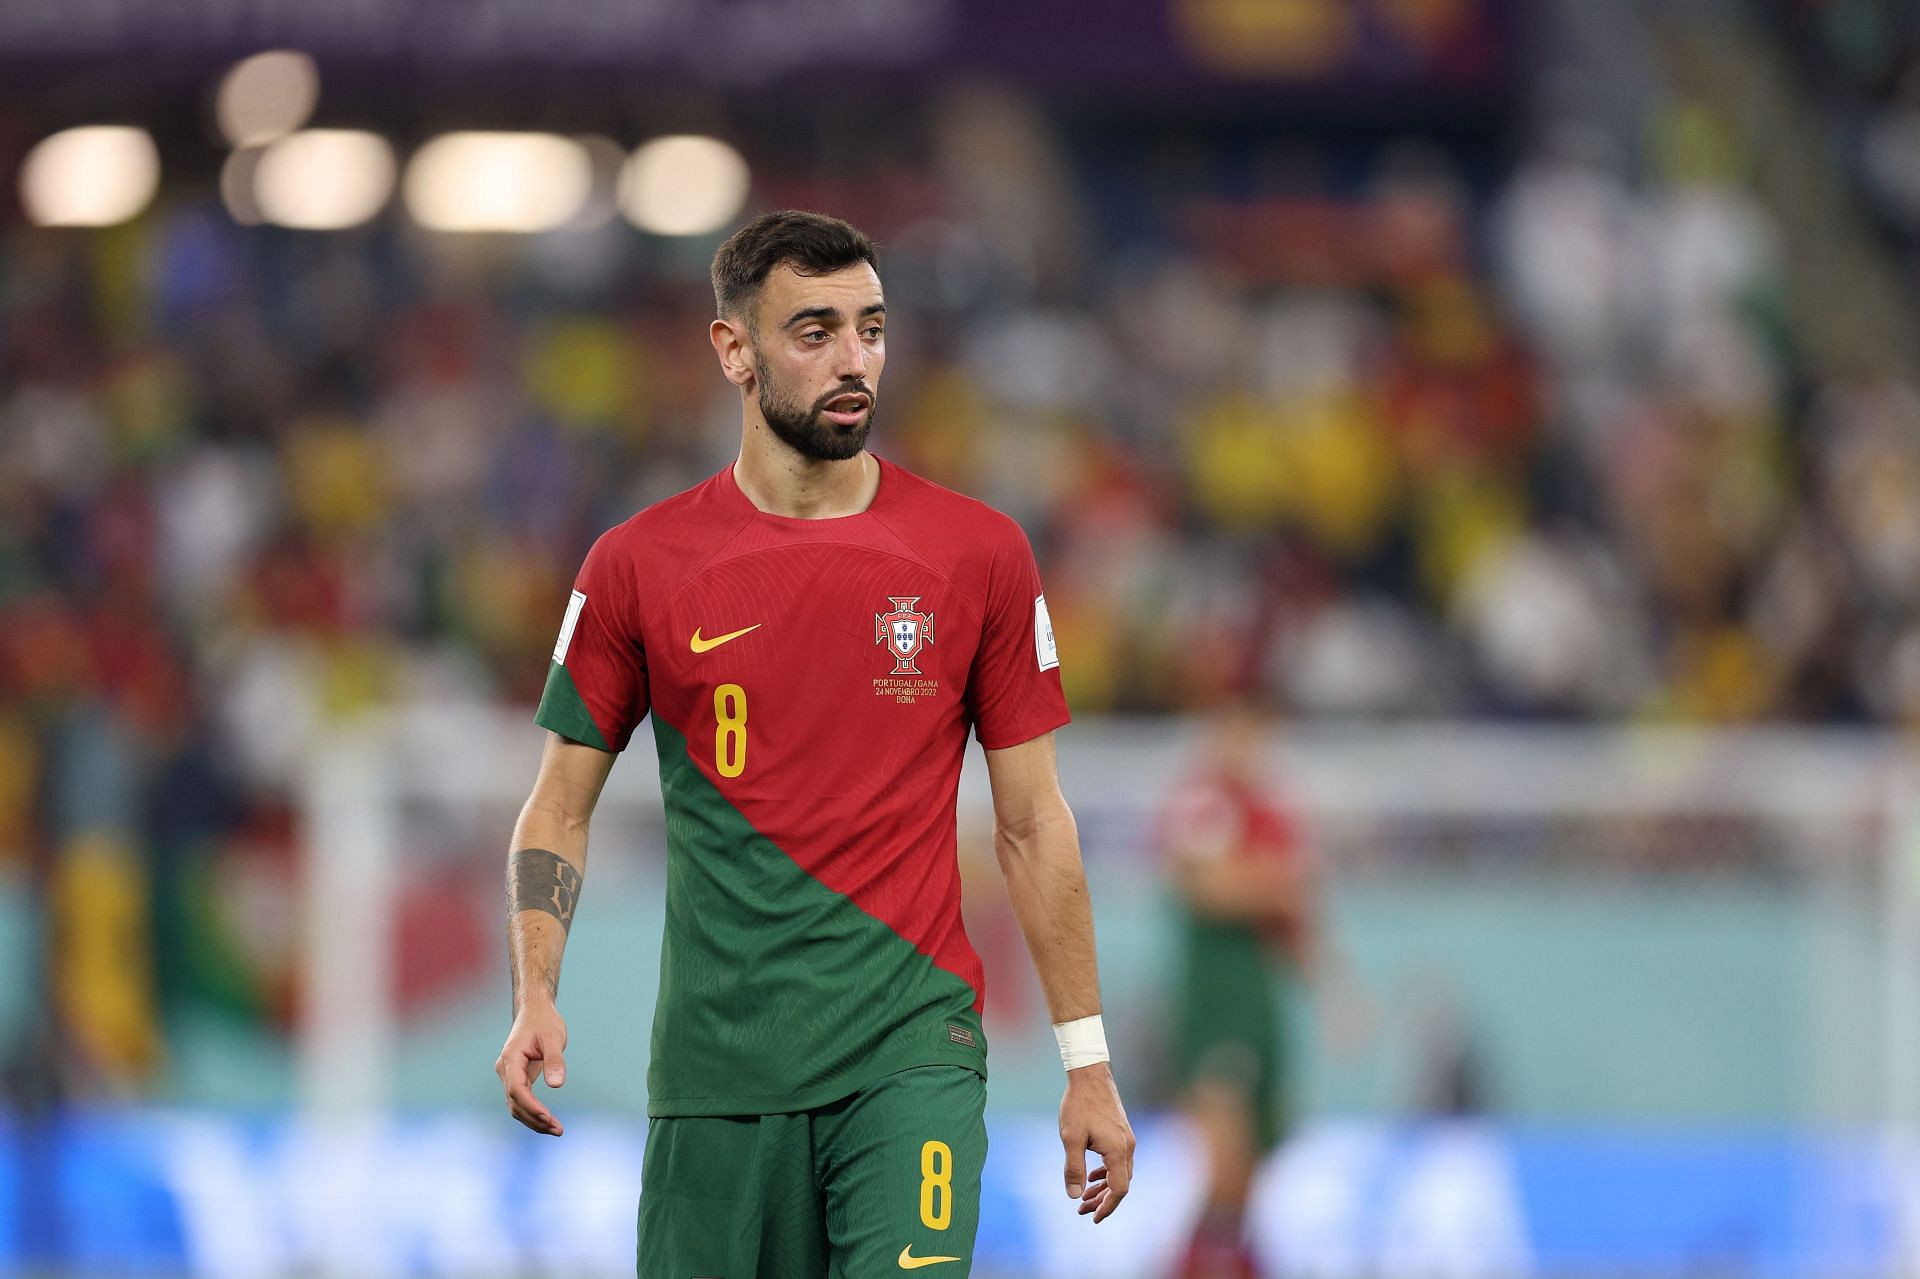 Bruno Fernandes produced two assists against Ghana